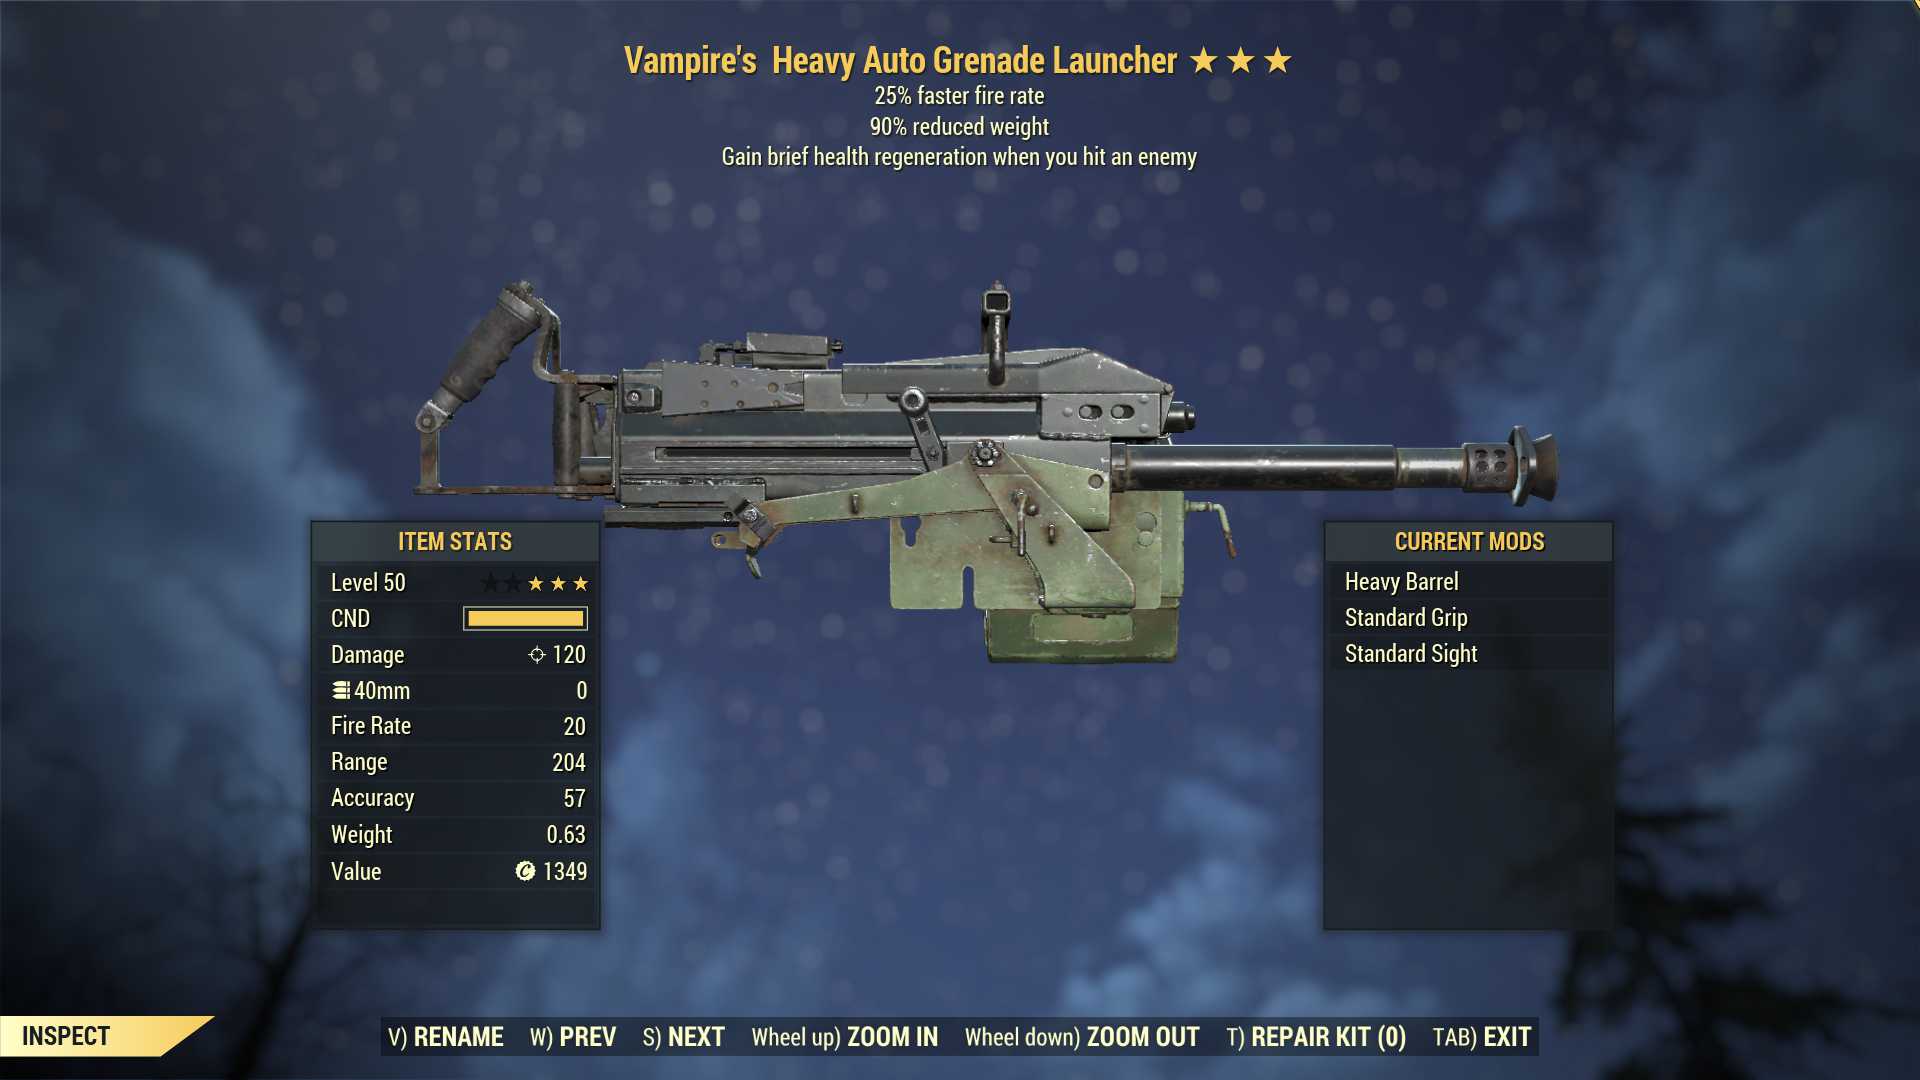 Vampire's Auto Grenade Launcher (25% faster fire rate, 90% reduced weight)